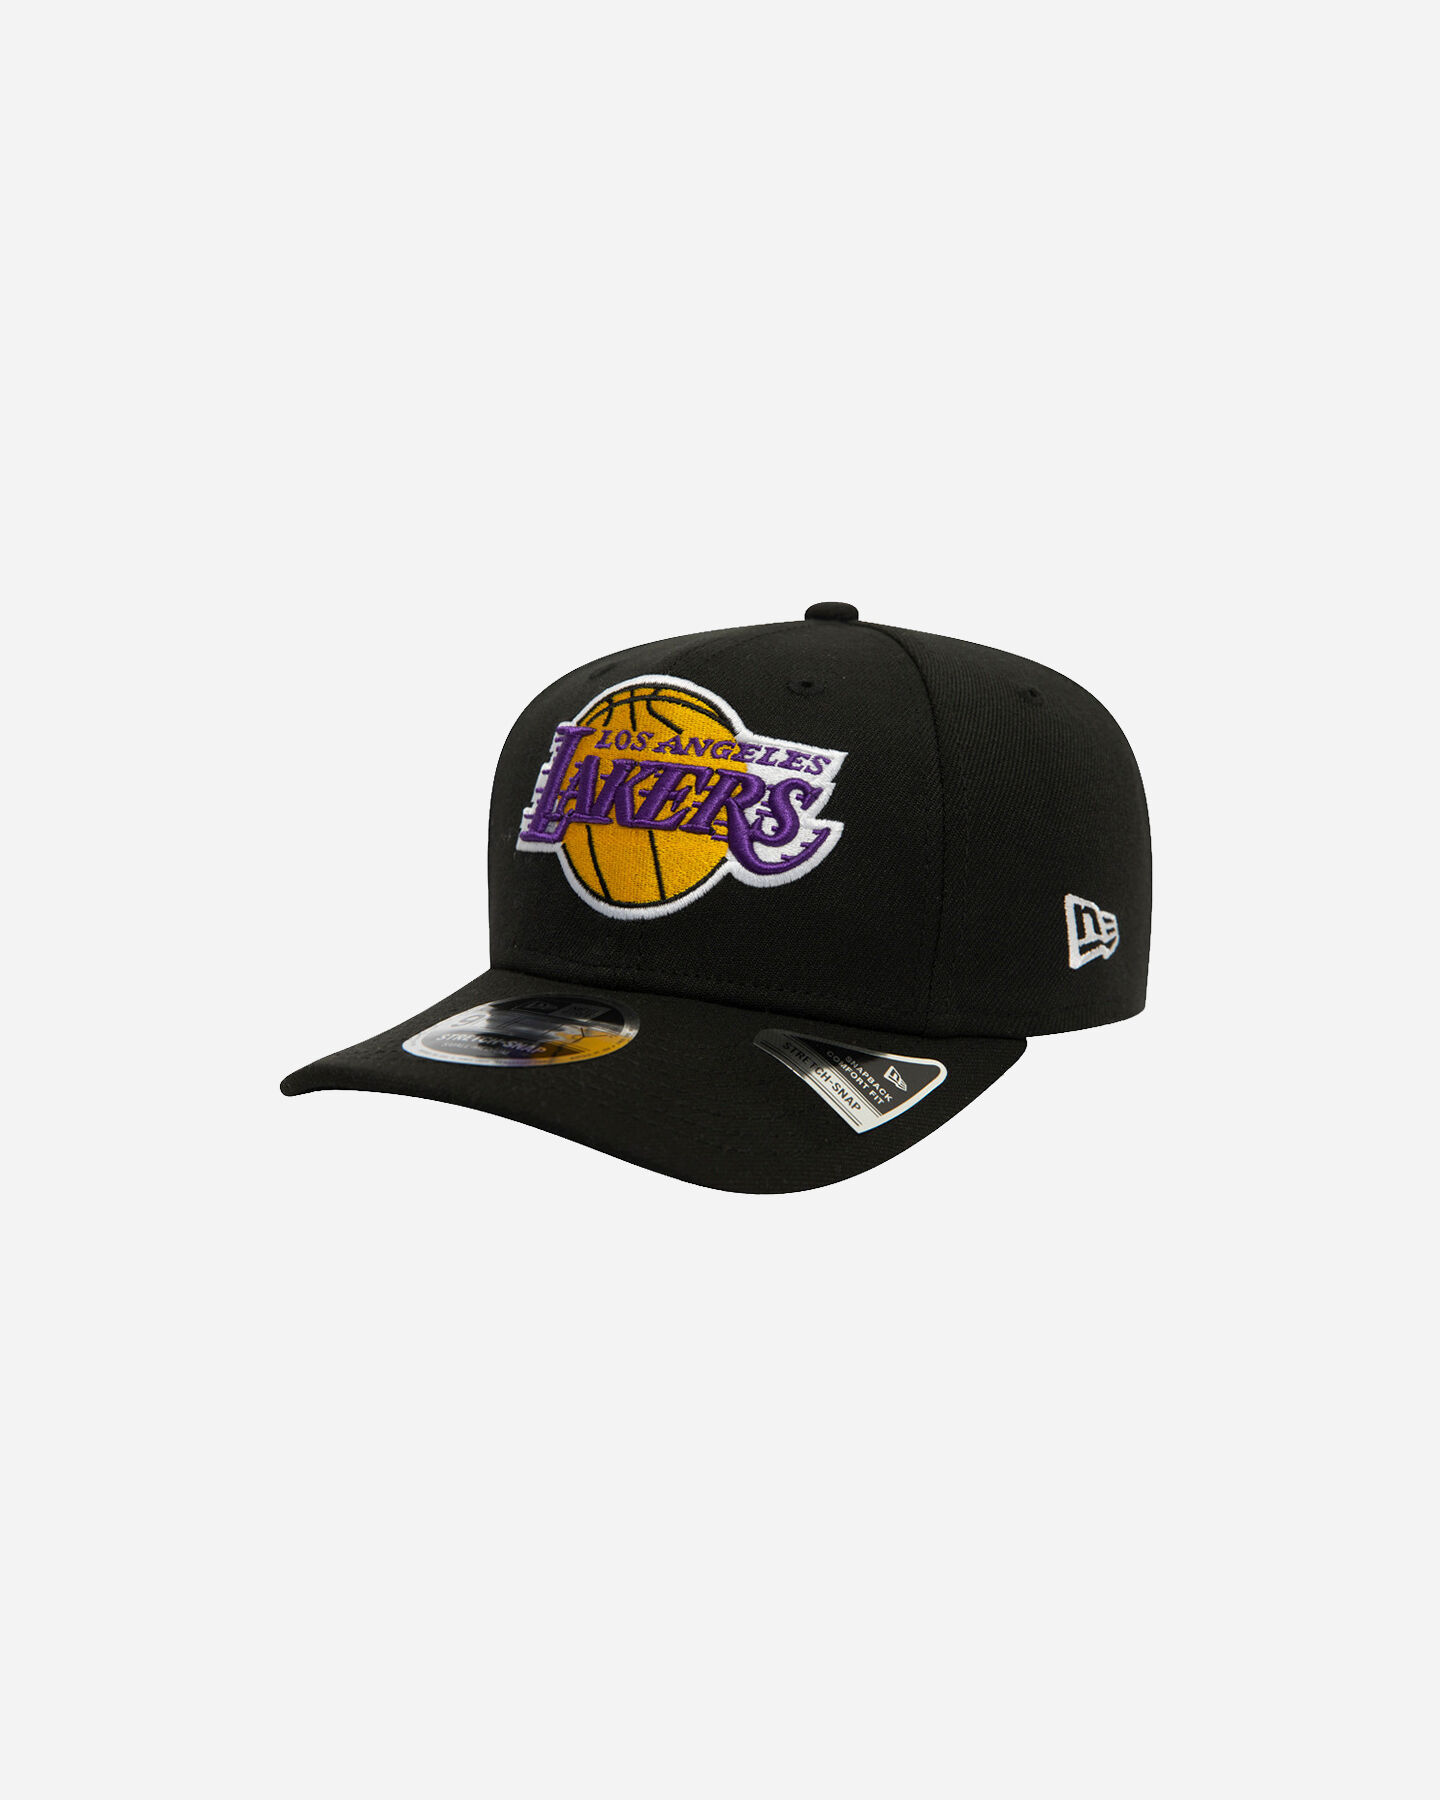  Cappellino NEW ERA 9FIFTY LOS ANGELES LAKERS  S5100642|001|SM scatto 0